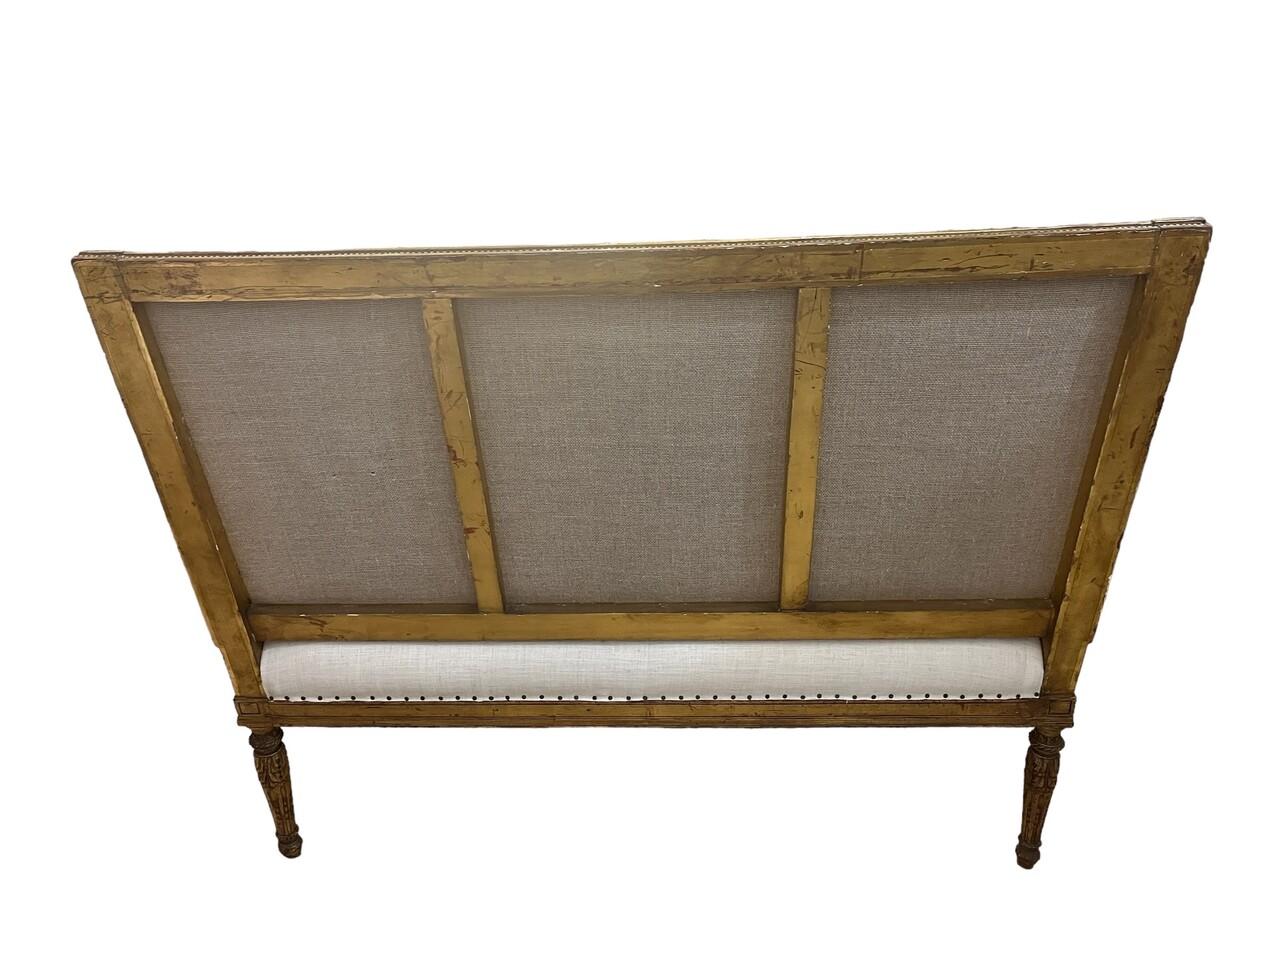 19th Century Louis XVI Style Giltwood Settee For Sale